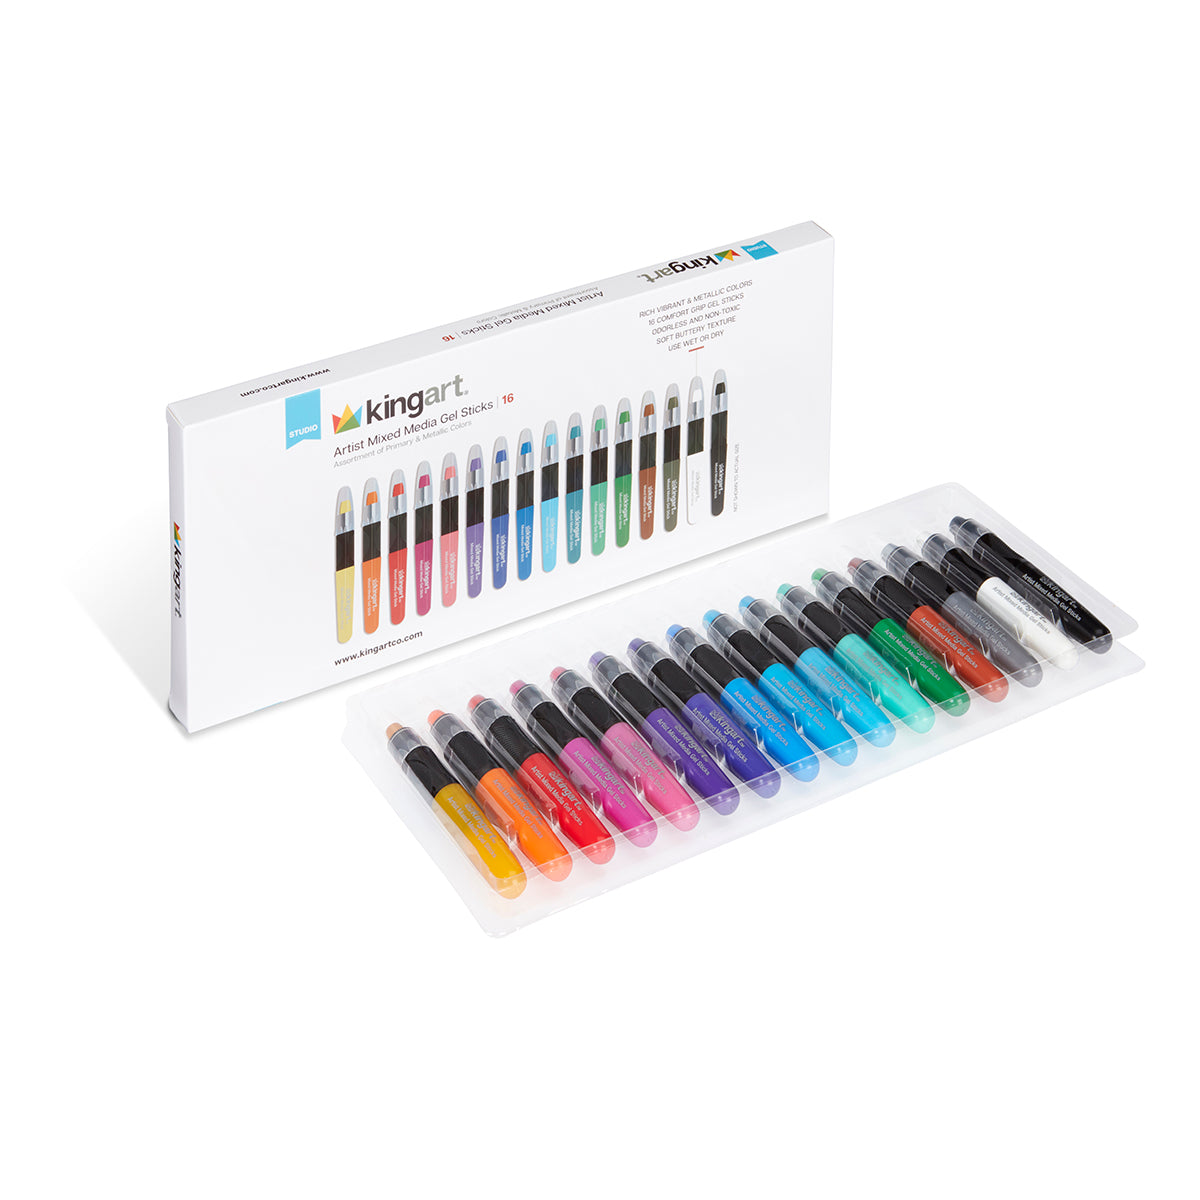 Water Brush Pens by EVAL, Set of 6 Aqua Pen Painting Brushes with